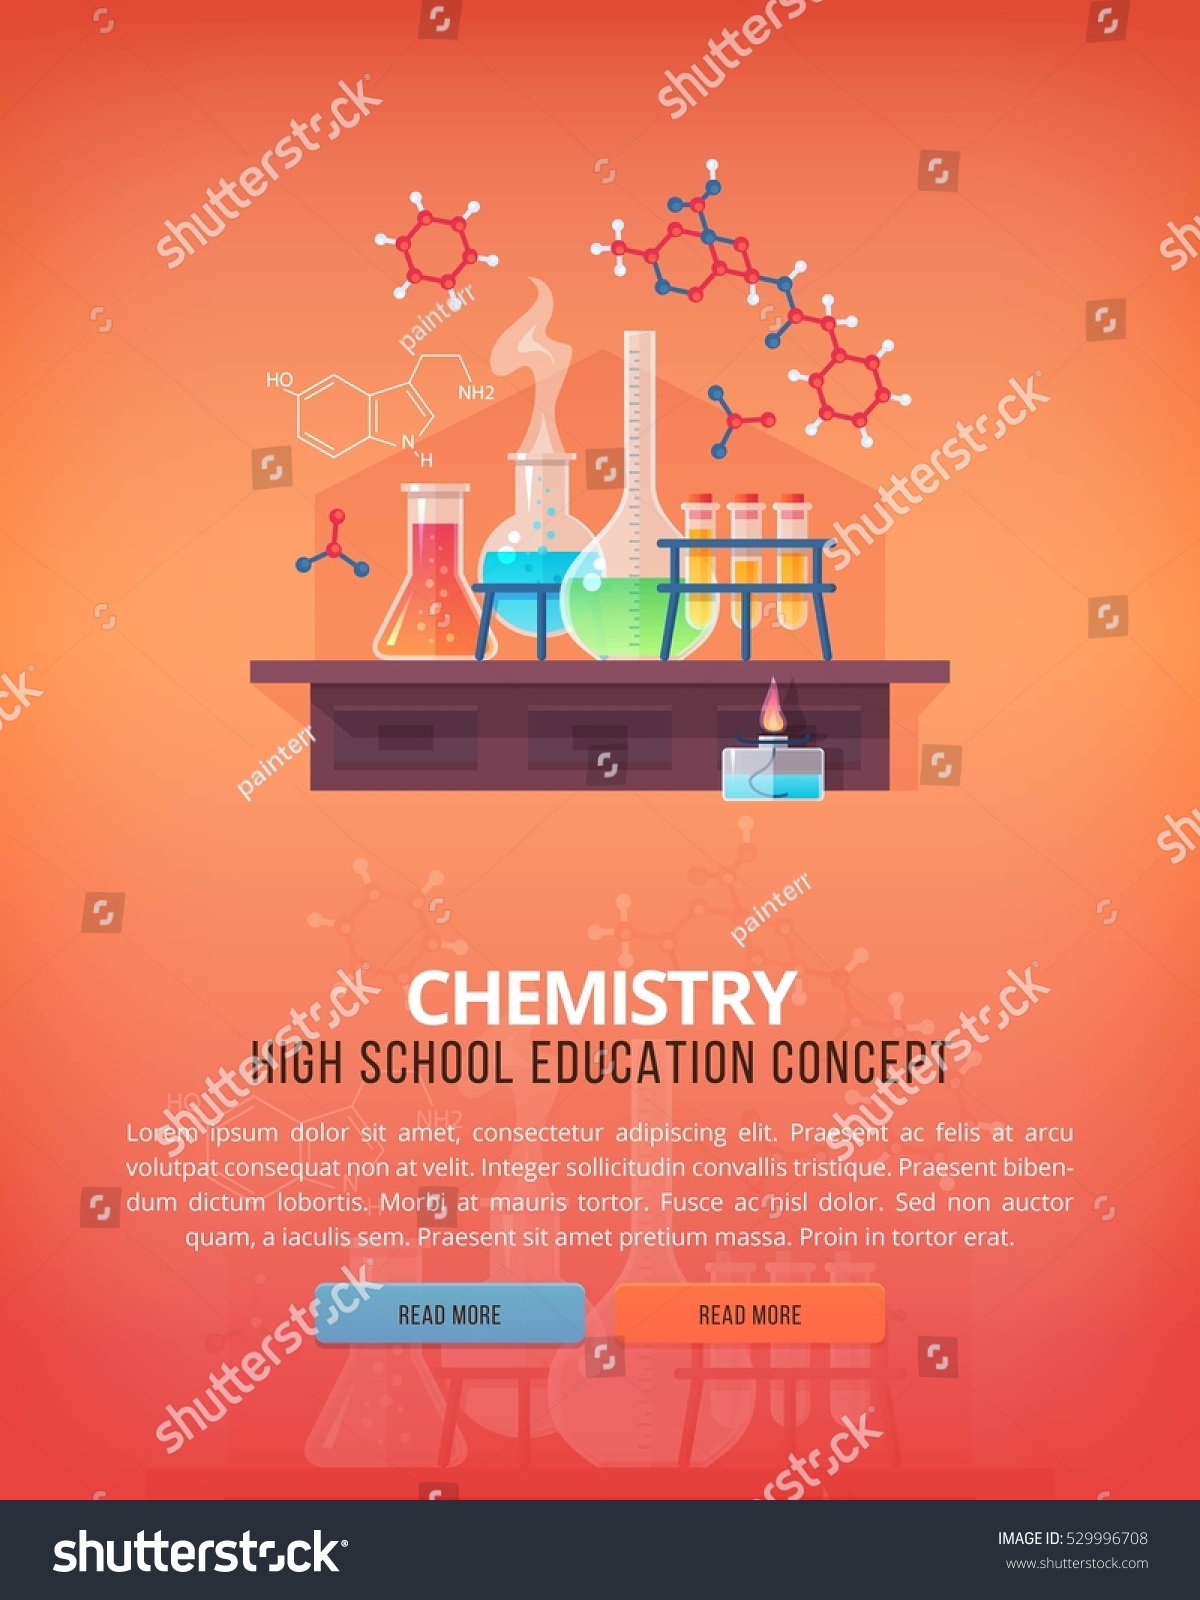 Education Science Concept Illustrations Organic Chemistry Stock Vector Royalty Free 529996708 2716